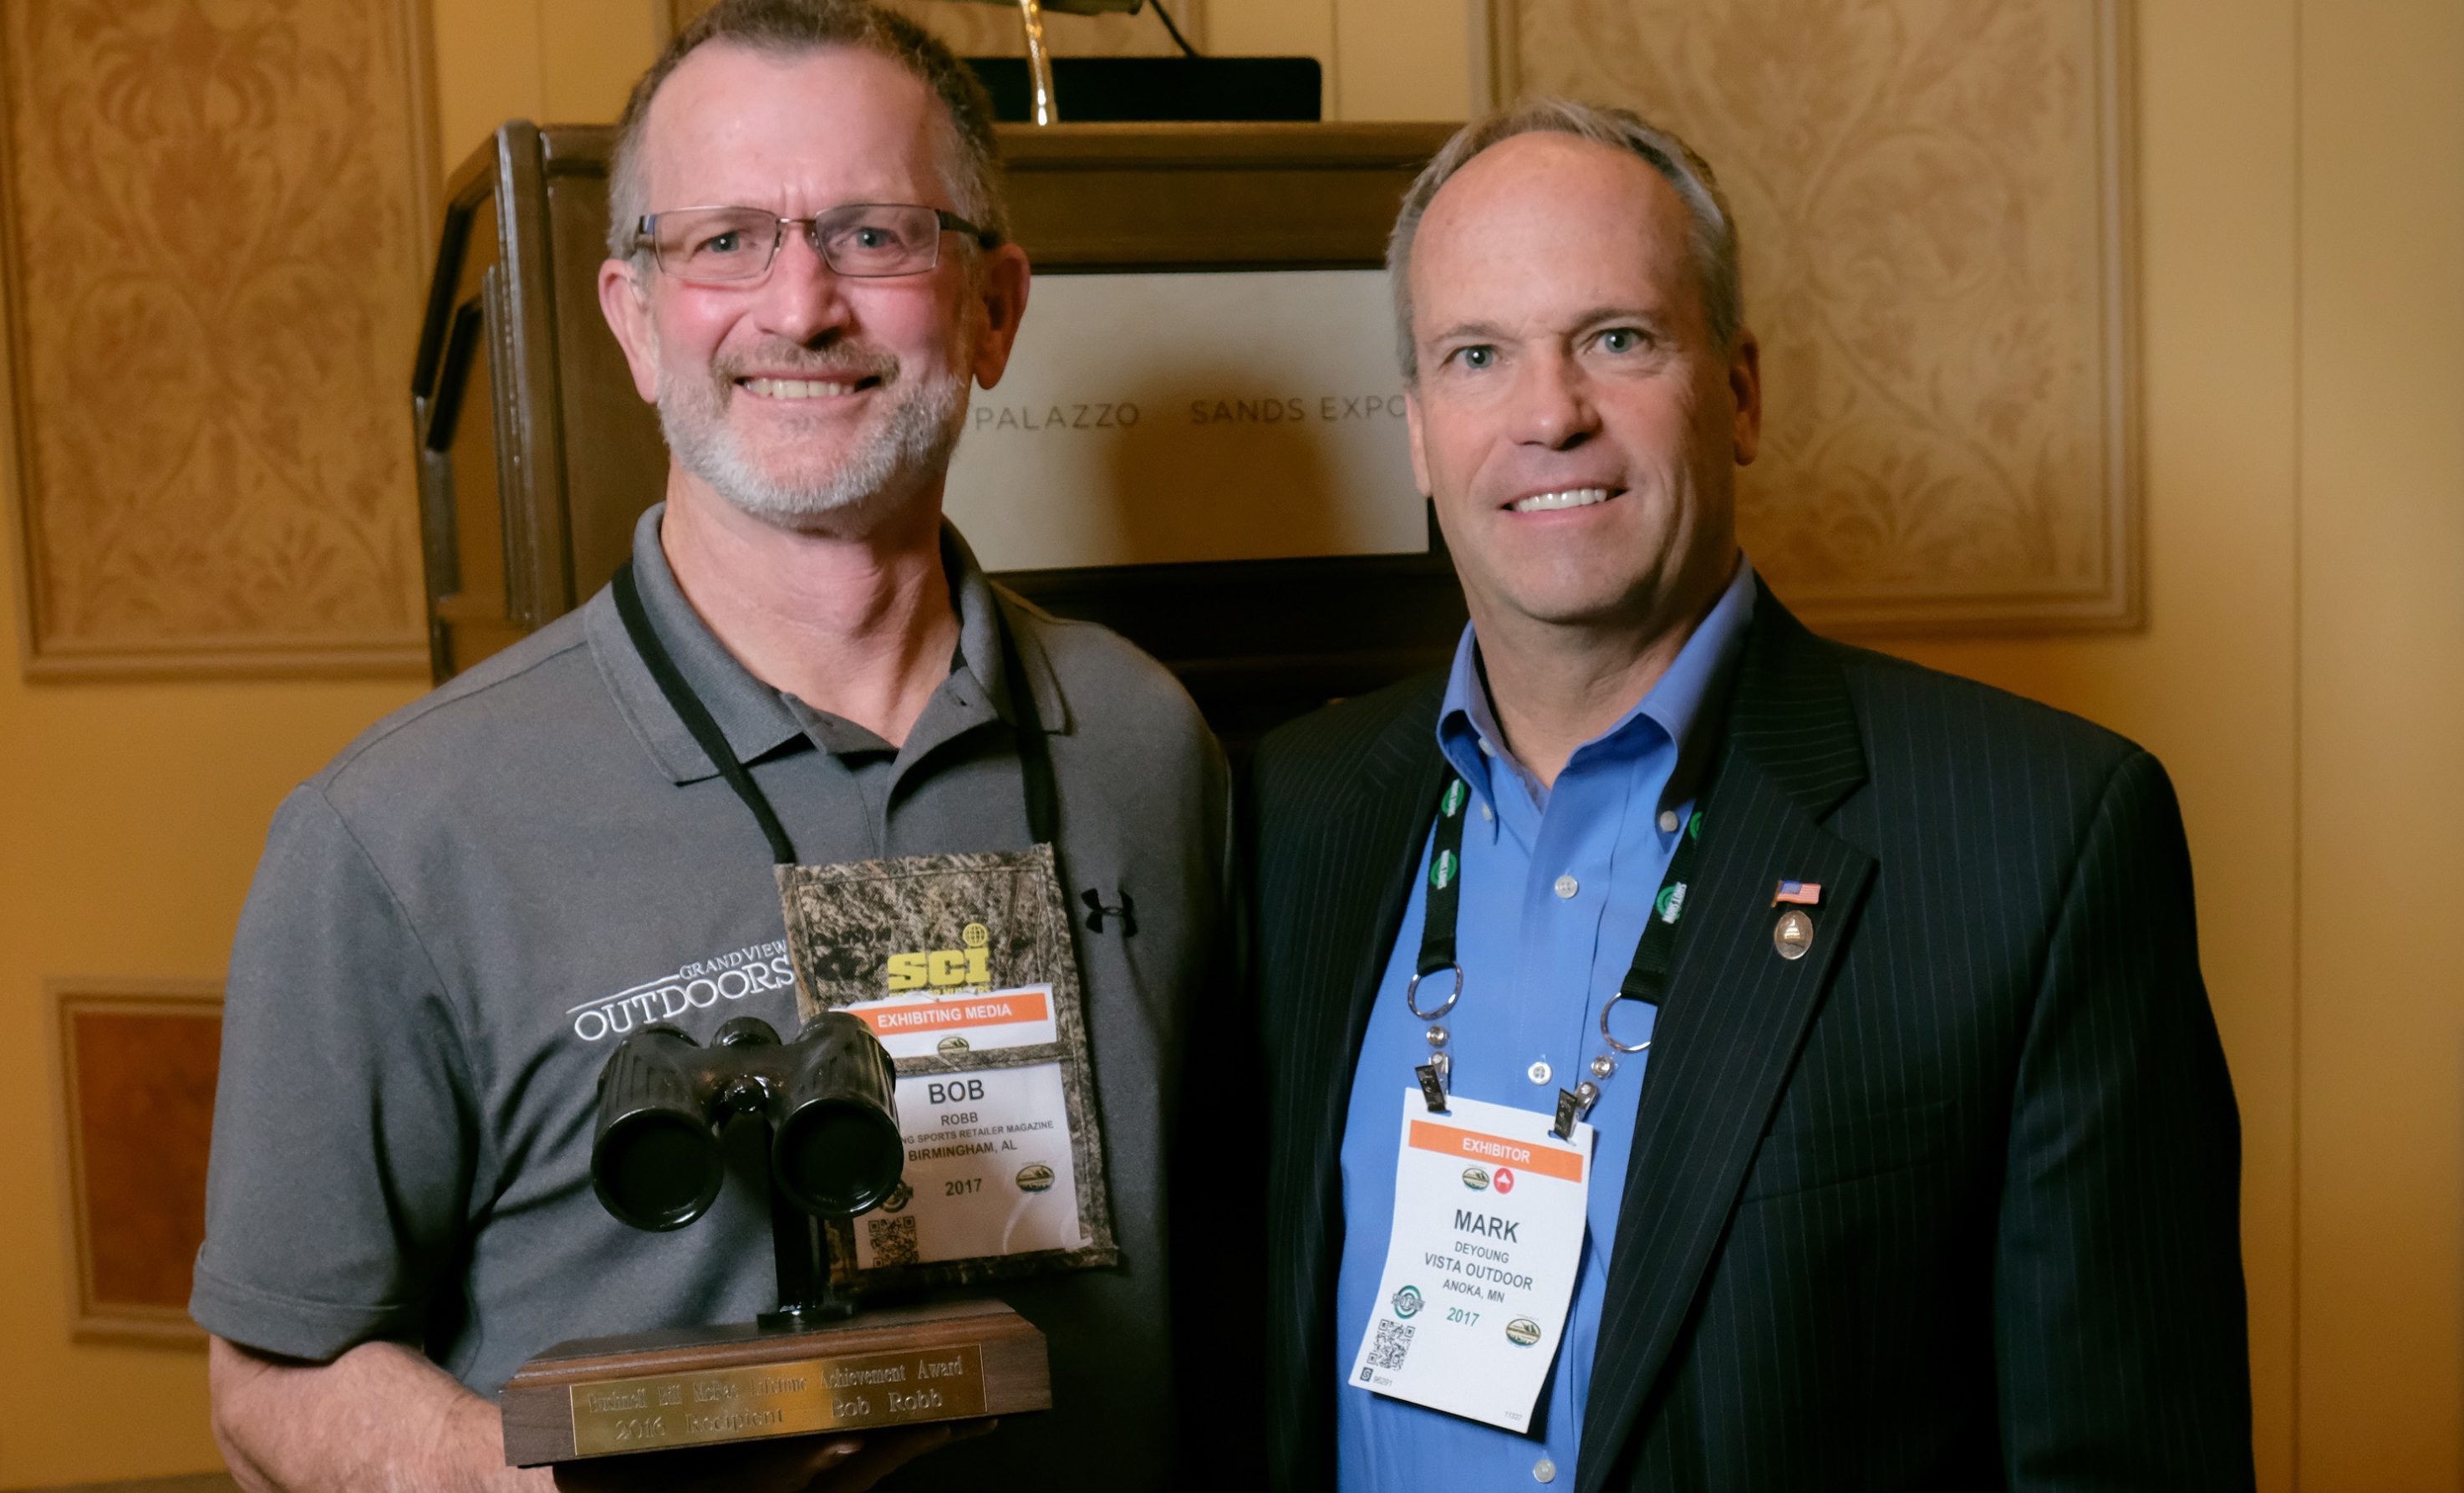 Bob Robb honored for lifetime achievement at 2017 SHOT Show. 